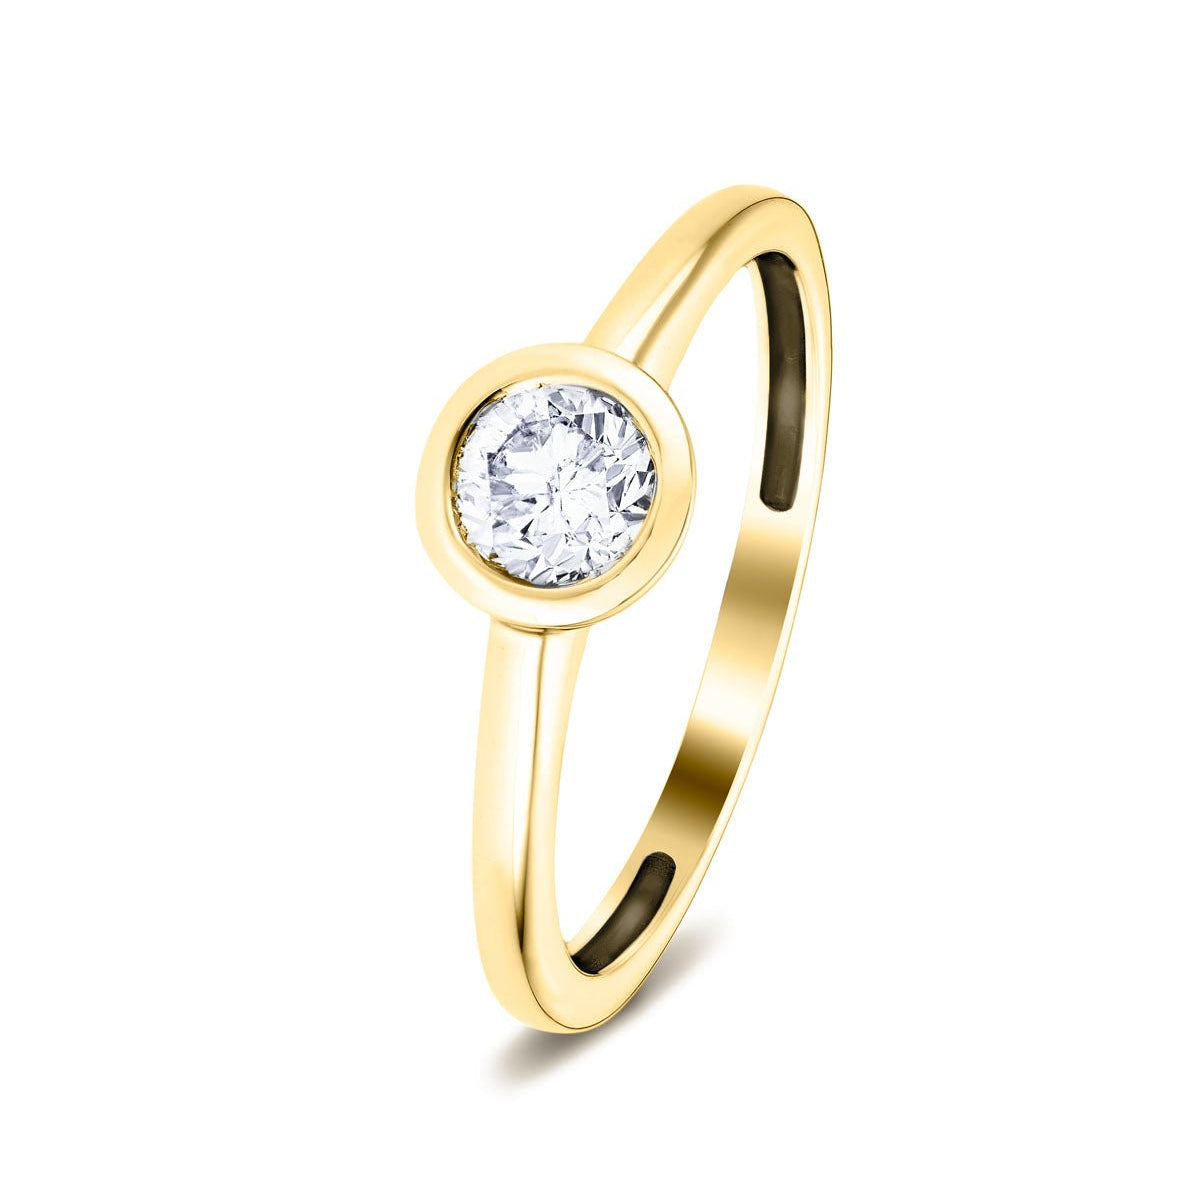 Certified Rub Over Diamond Solitaire Engagement Ring 0.50ct G/SI 18k Yellow Gold - All Diamond